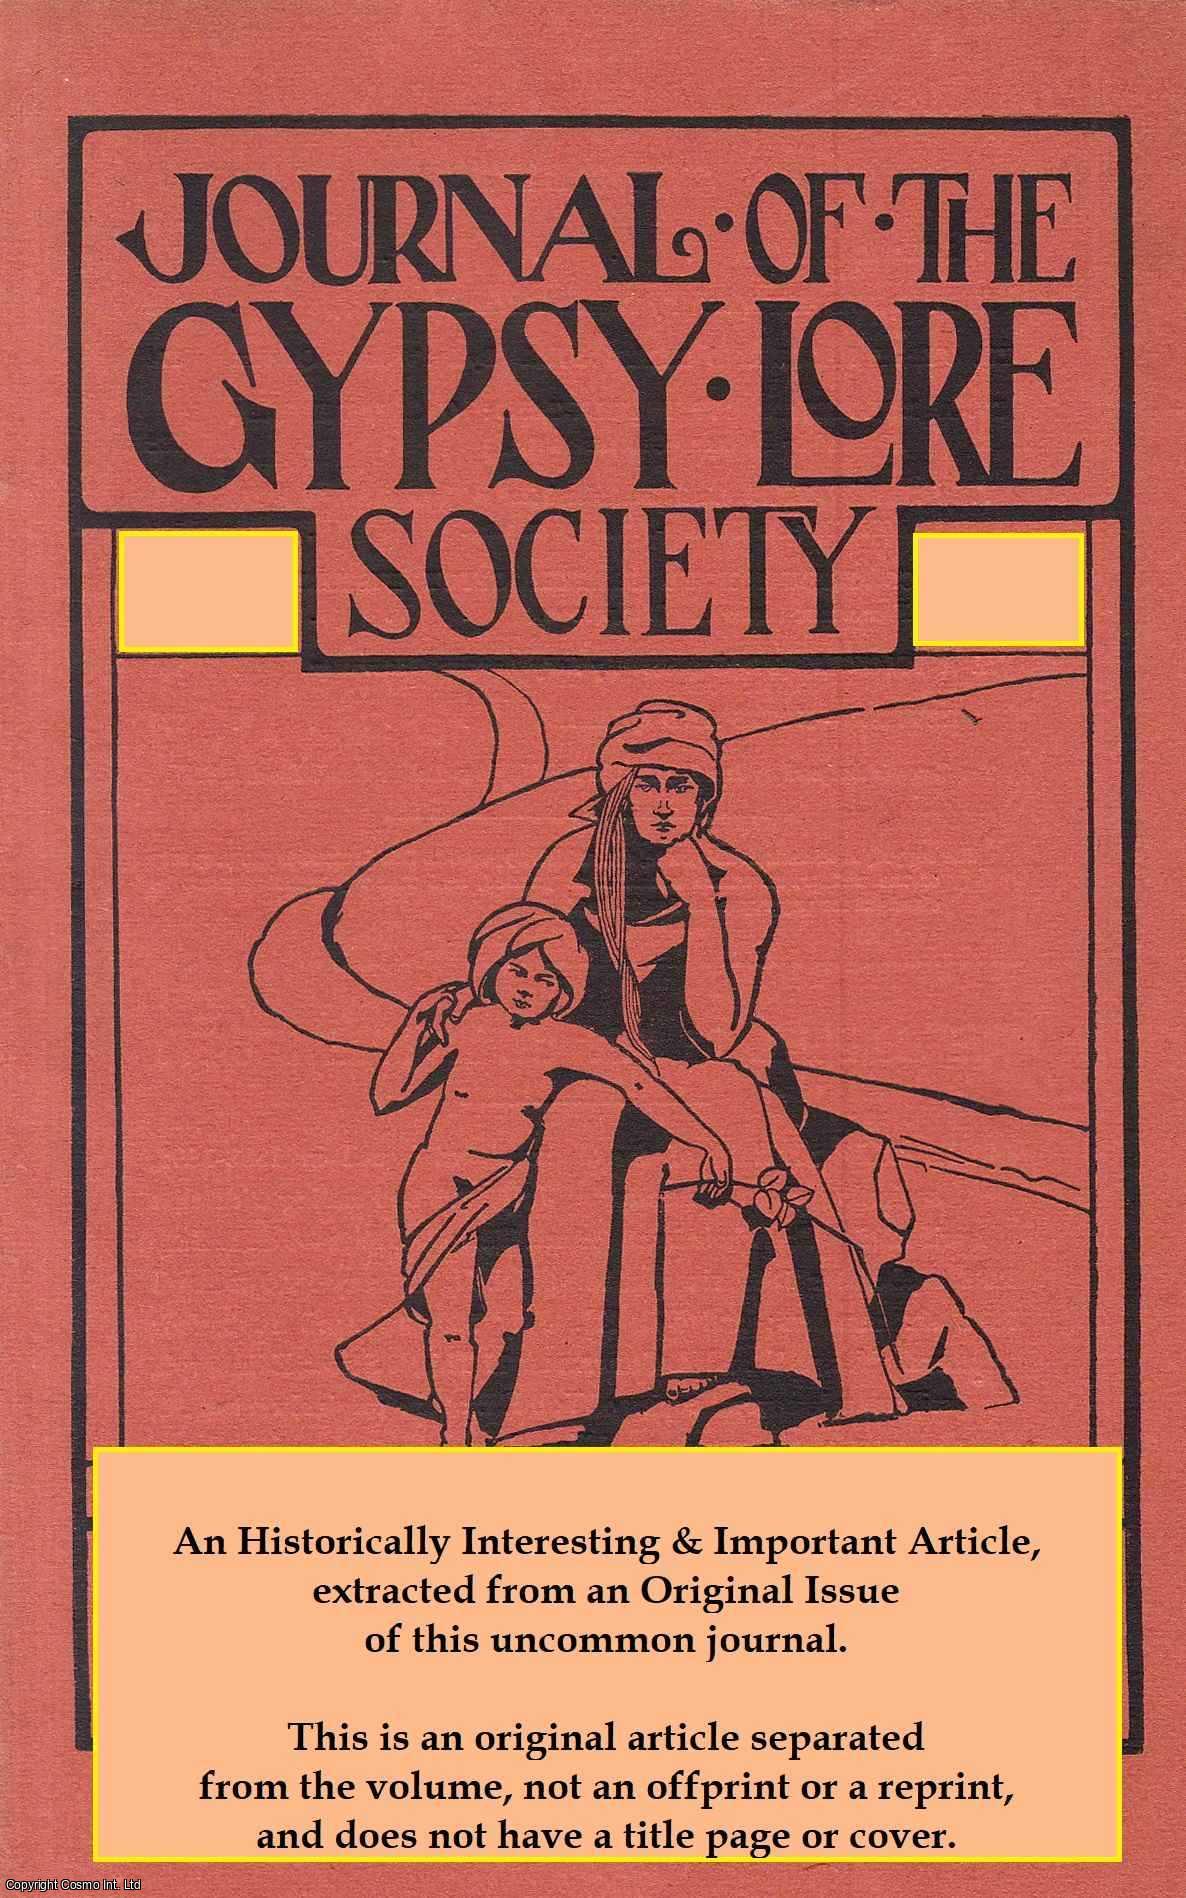 Dr. Endre Spur - Jozsi the Second (part 2): Musical Interviews. An uncommon original article from the Journal of the Gypsy Lore Society, 1948.